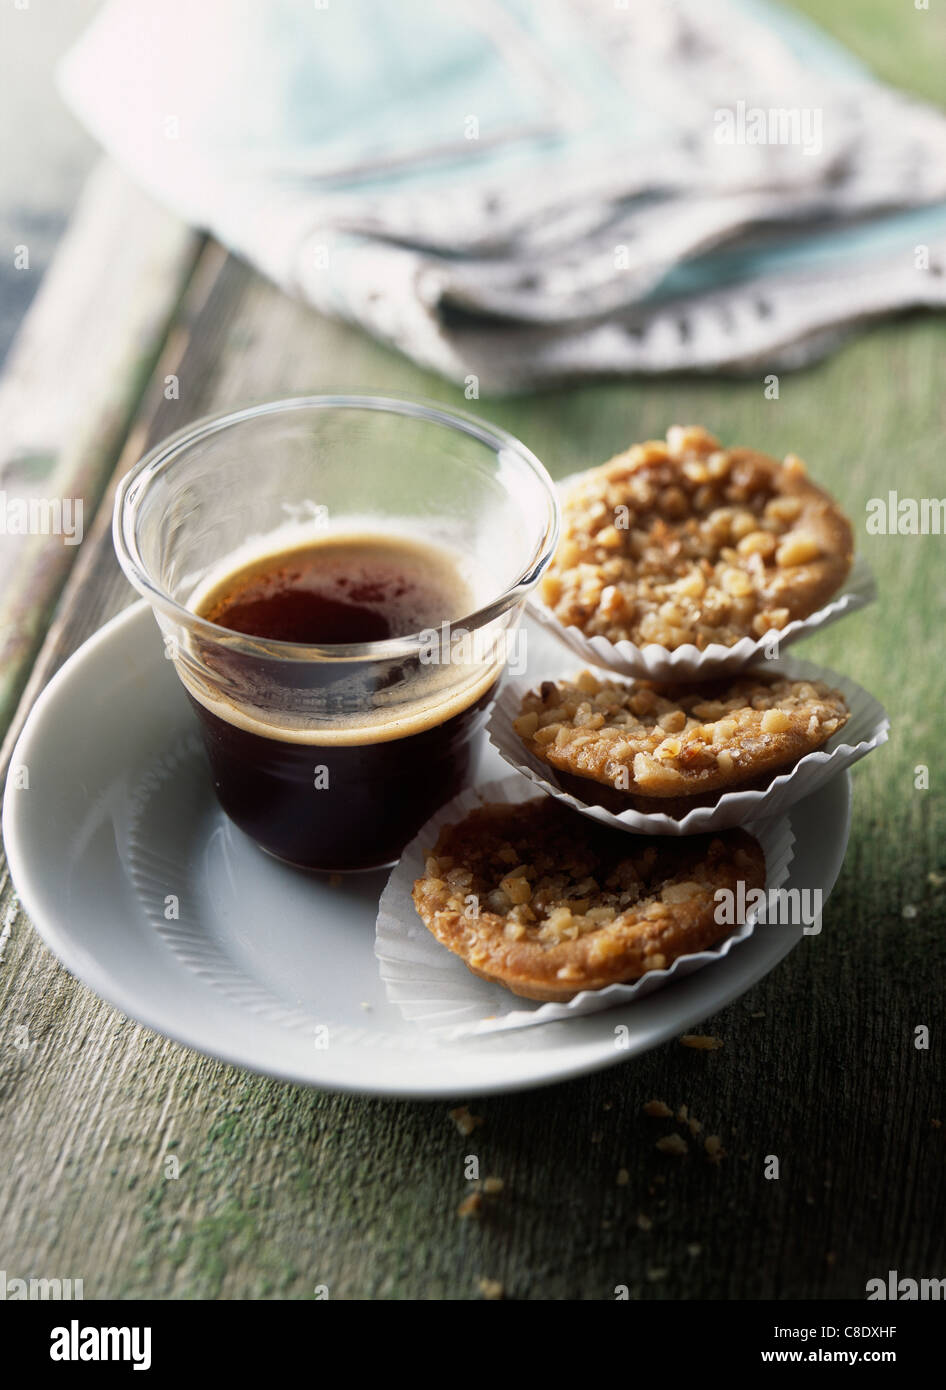 Coffee and small almond cookies Stock Photo